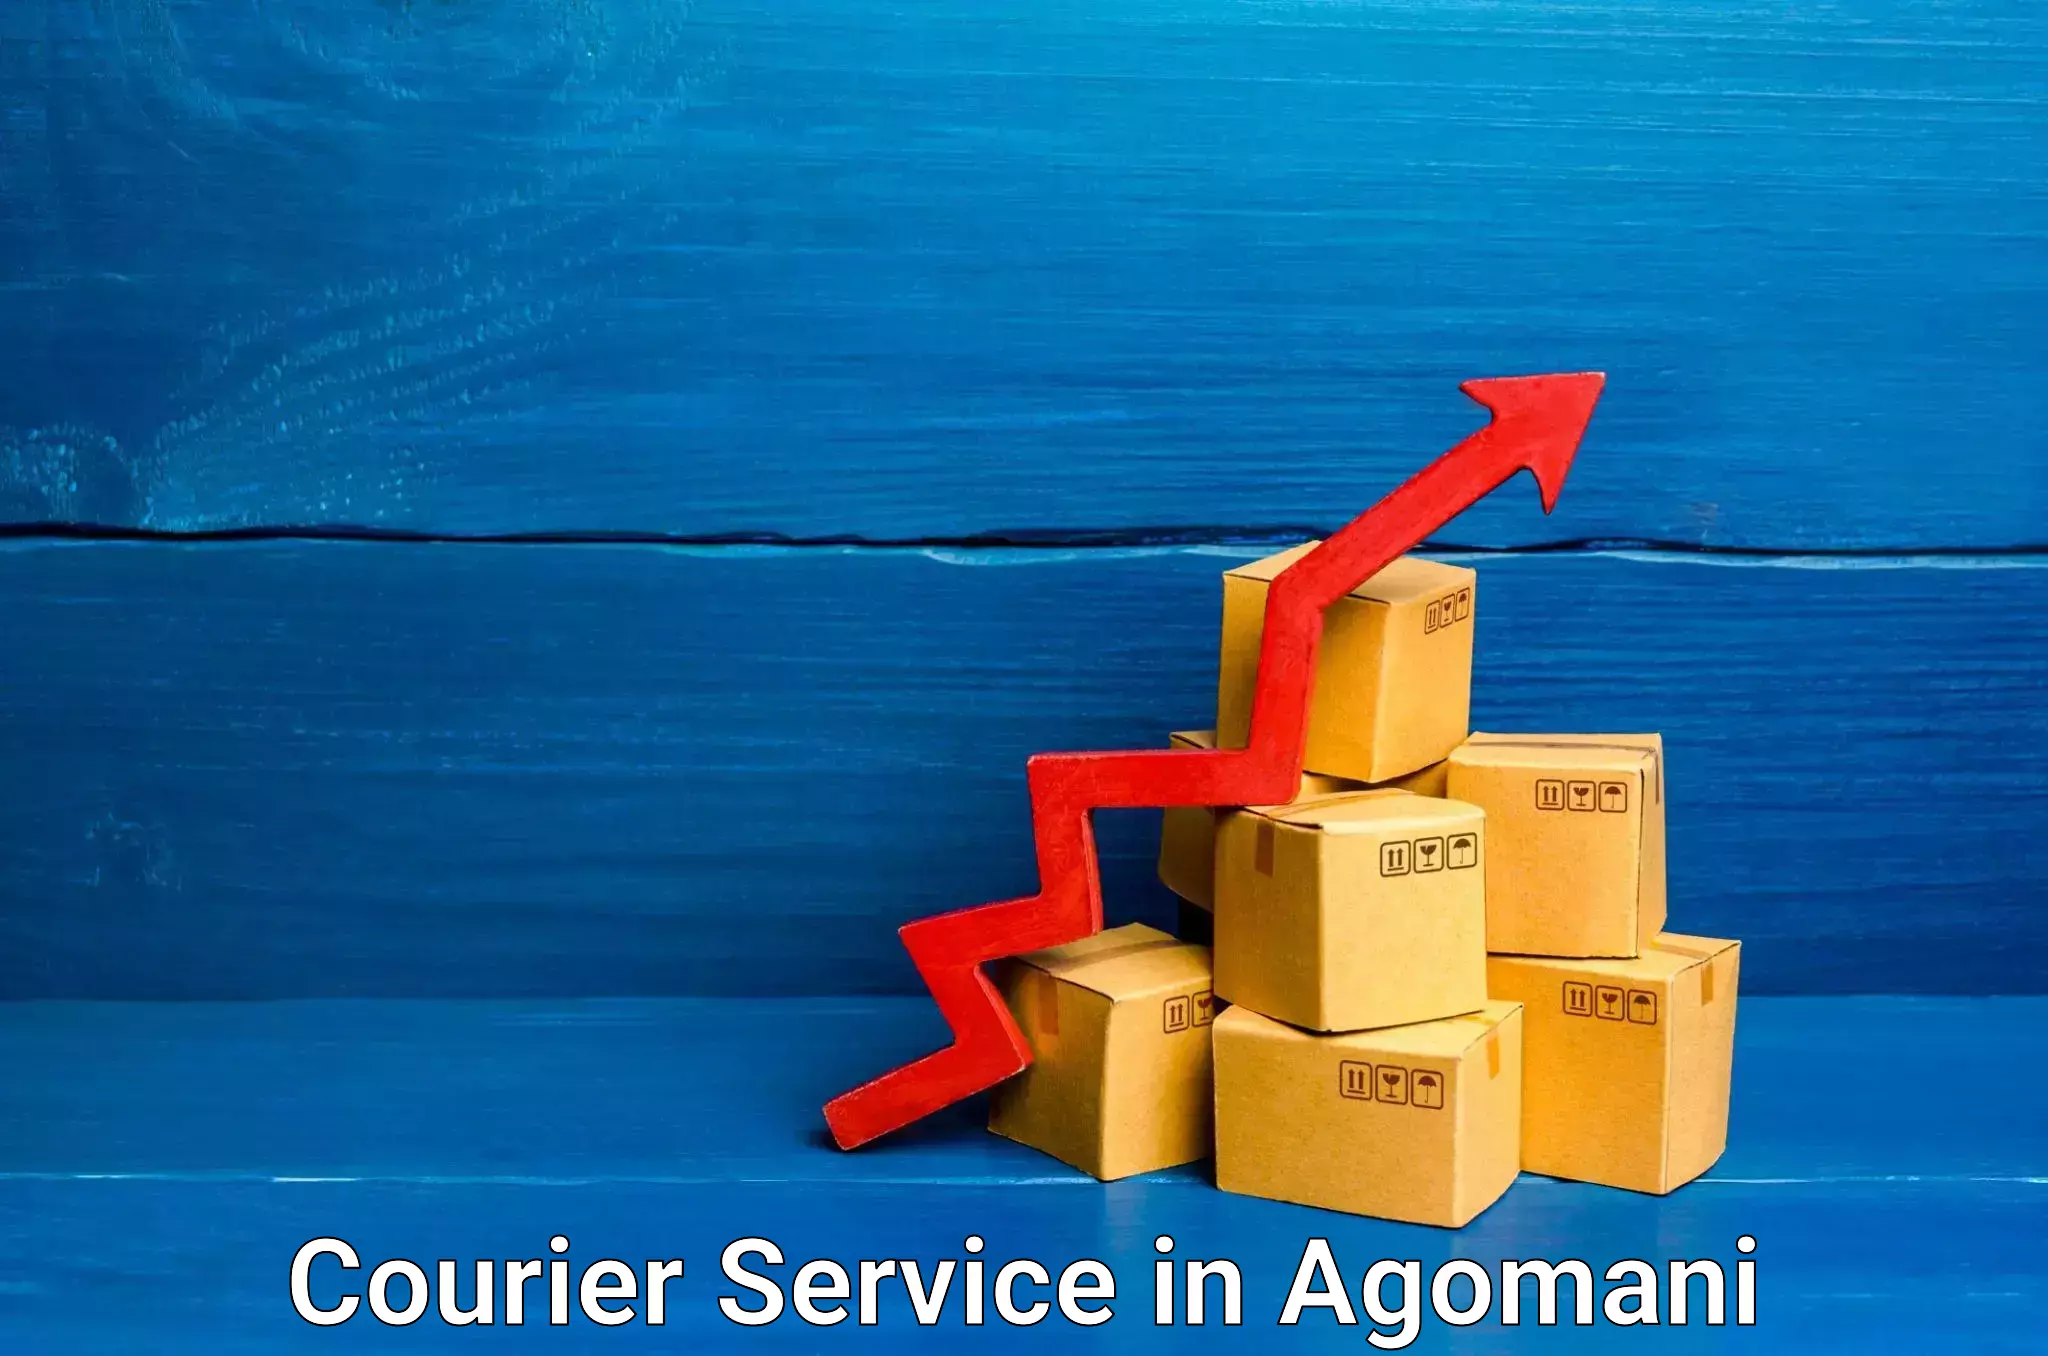 Efficient freight service in Agomani